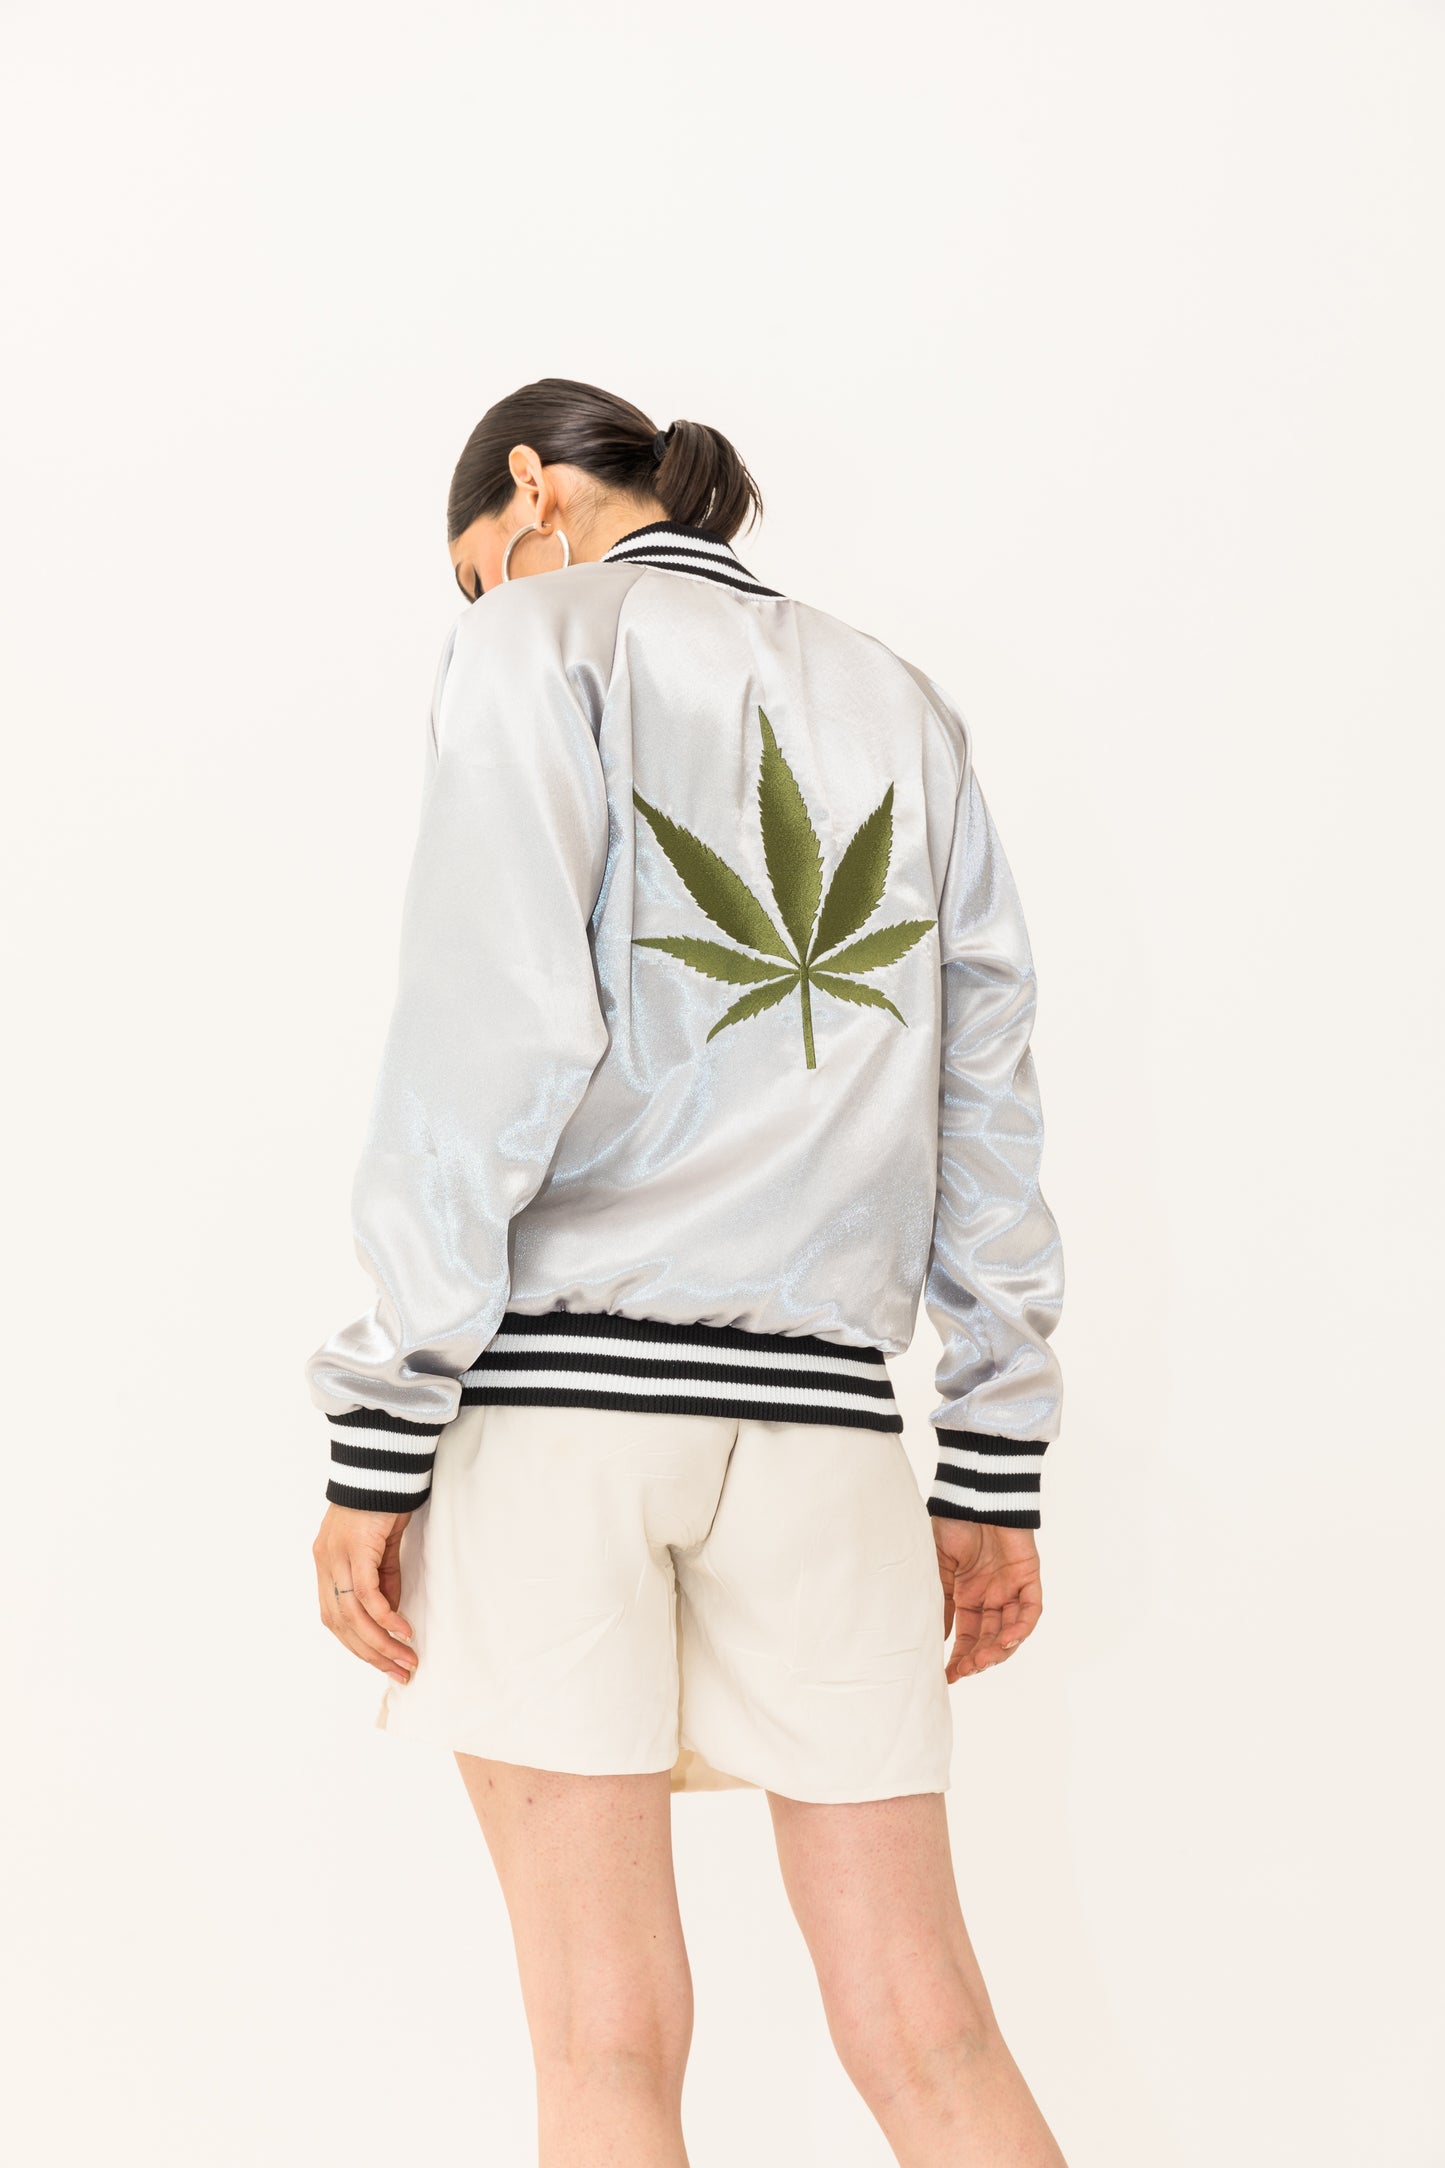 The 420 Bomber, Silver/Green